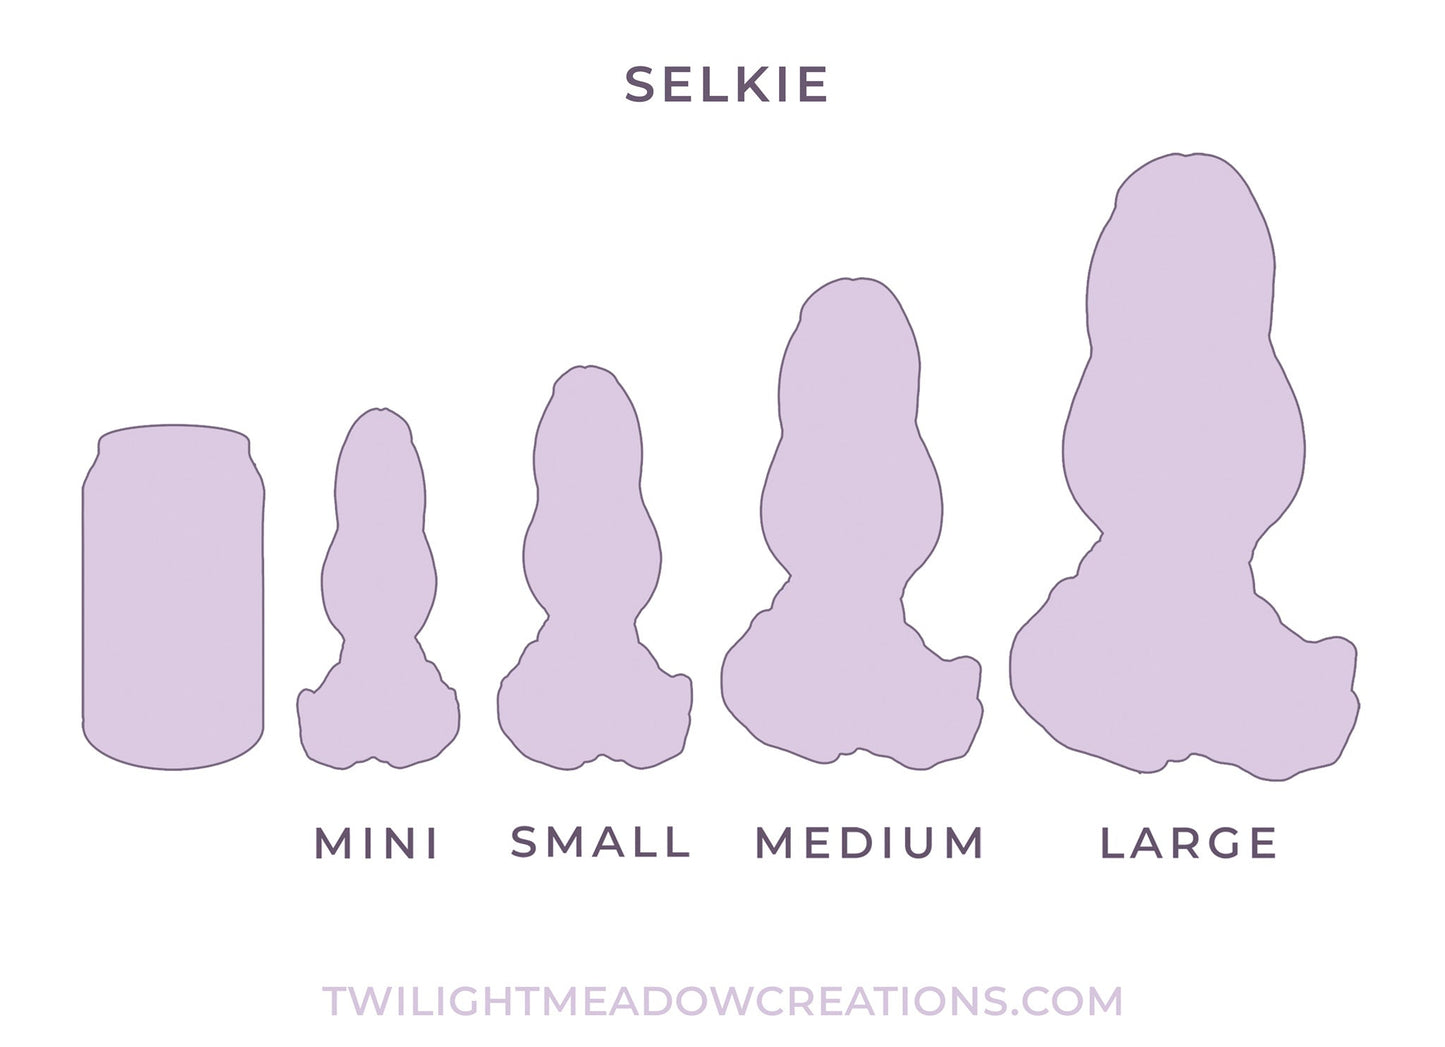 Large Selkie (Firmness: Soft)